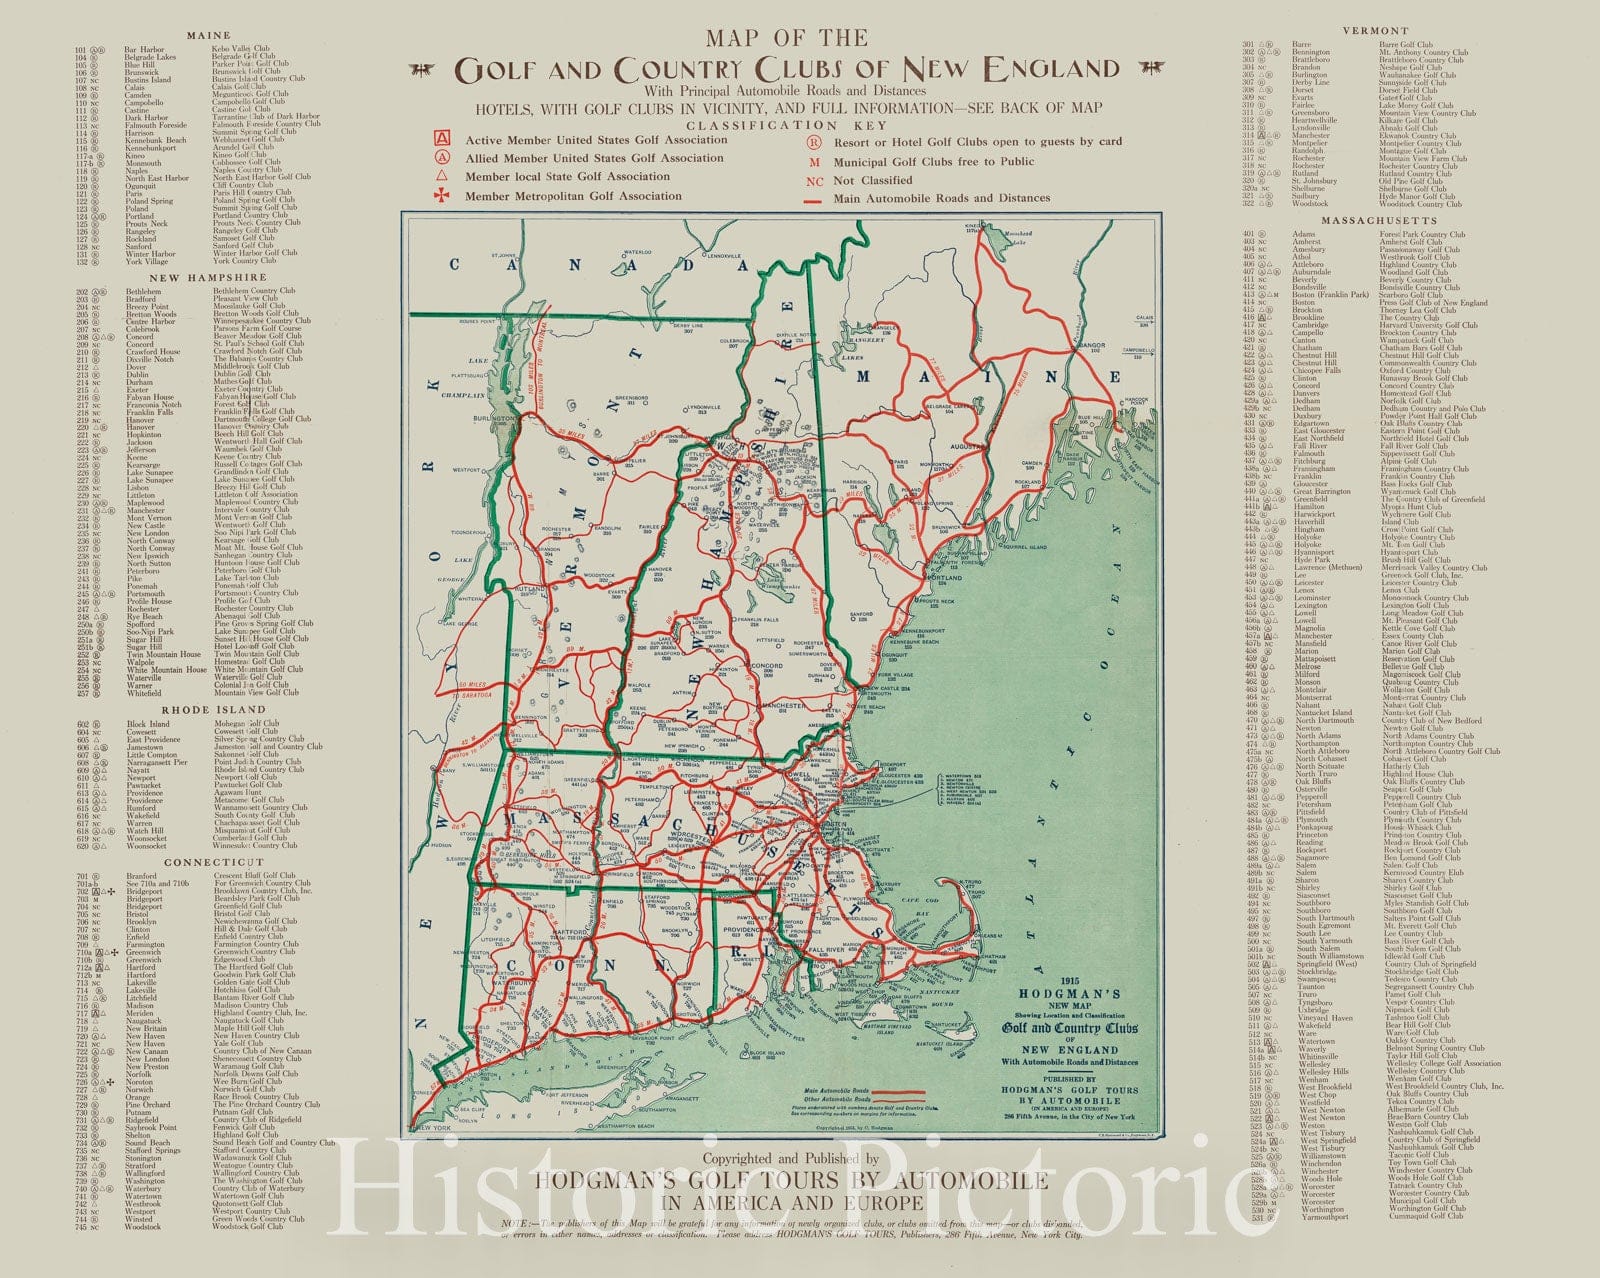 Historical Map, 1915 Hodgman's new map showing location and classification golf and country clubs of New England with automobile roads and distances, Vintage Wall Art